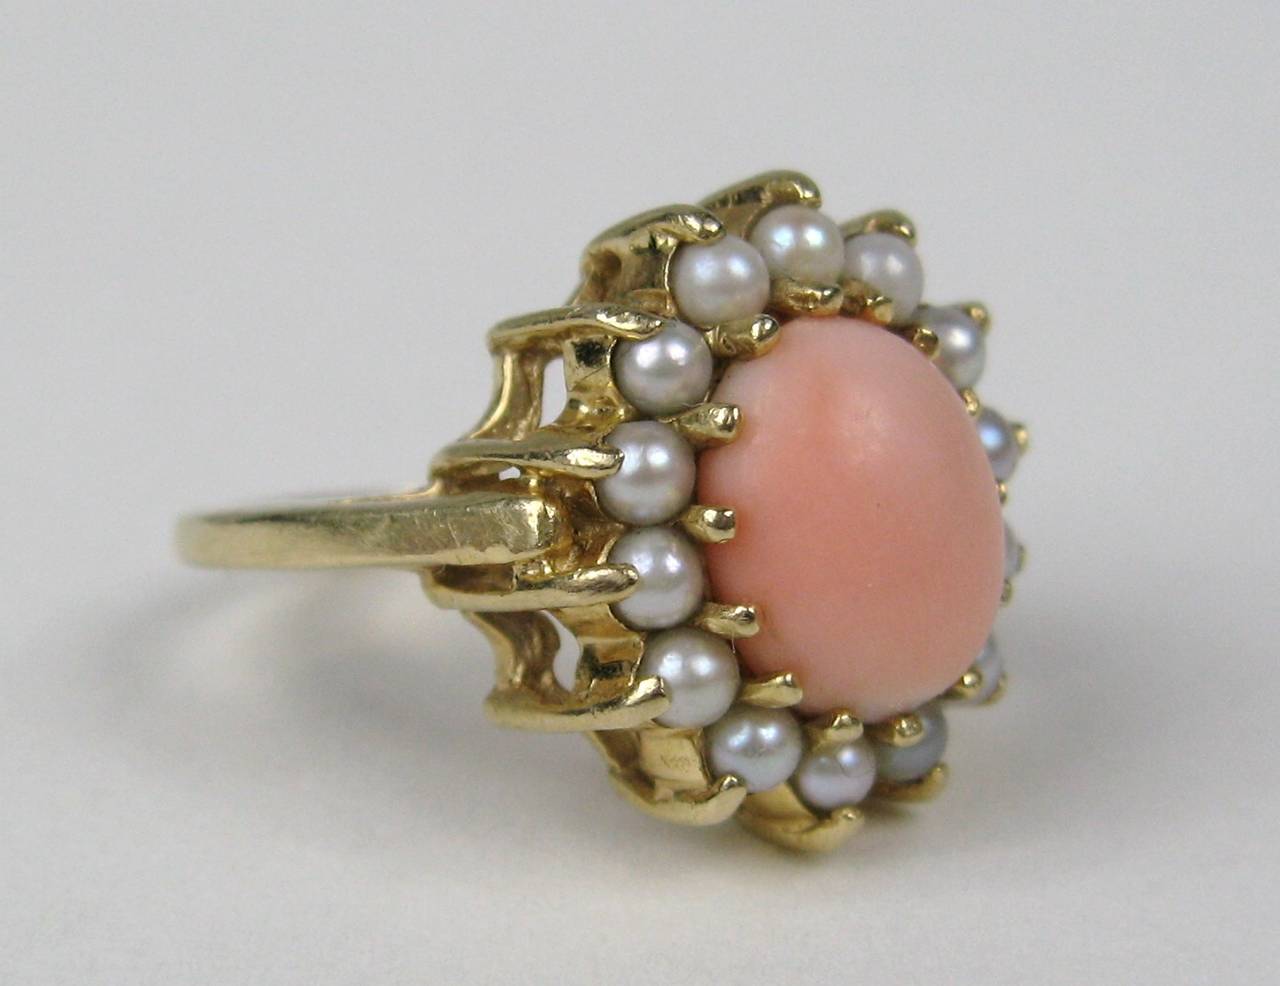 14K Gold Ring, Coral center surrounded by pearls. The Ring is a size 6 and can be sized by us or your jeweler. Ring measures .65 inches top to bottom. This is out of a massive collection of Hopi, Zuni, Navajo, Southwestern, sterling silver, costume